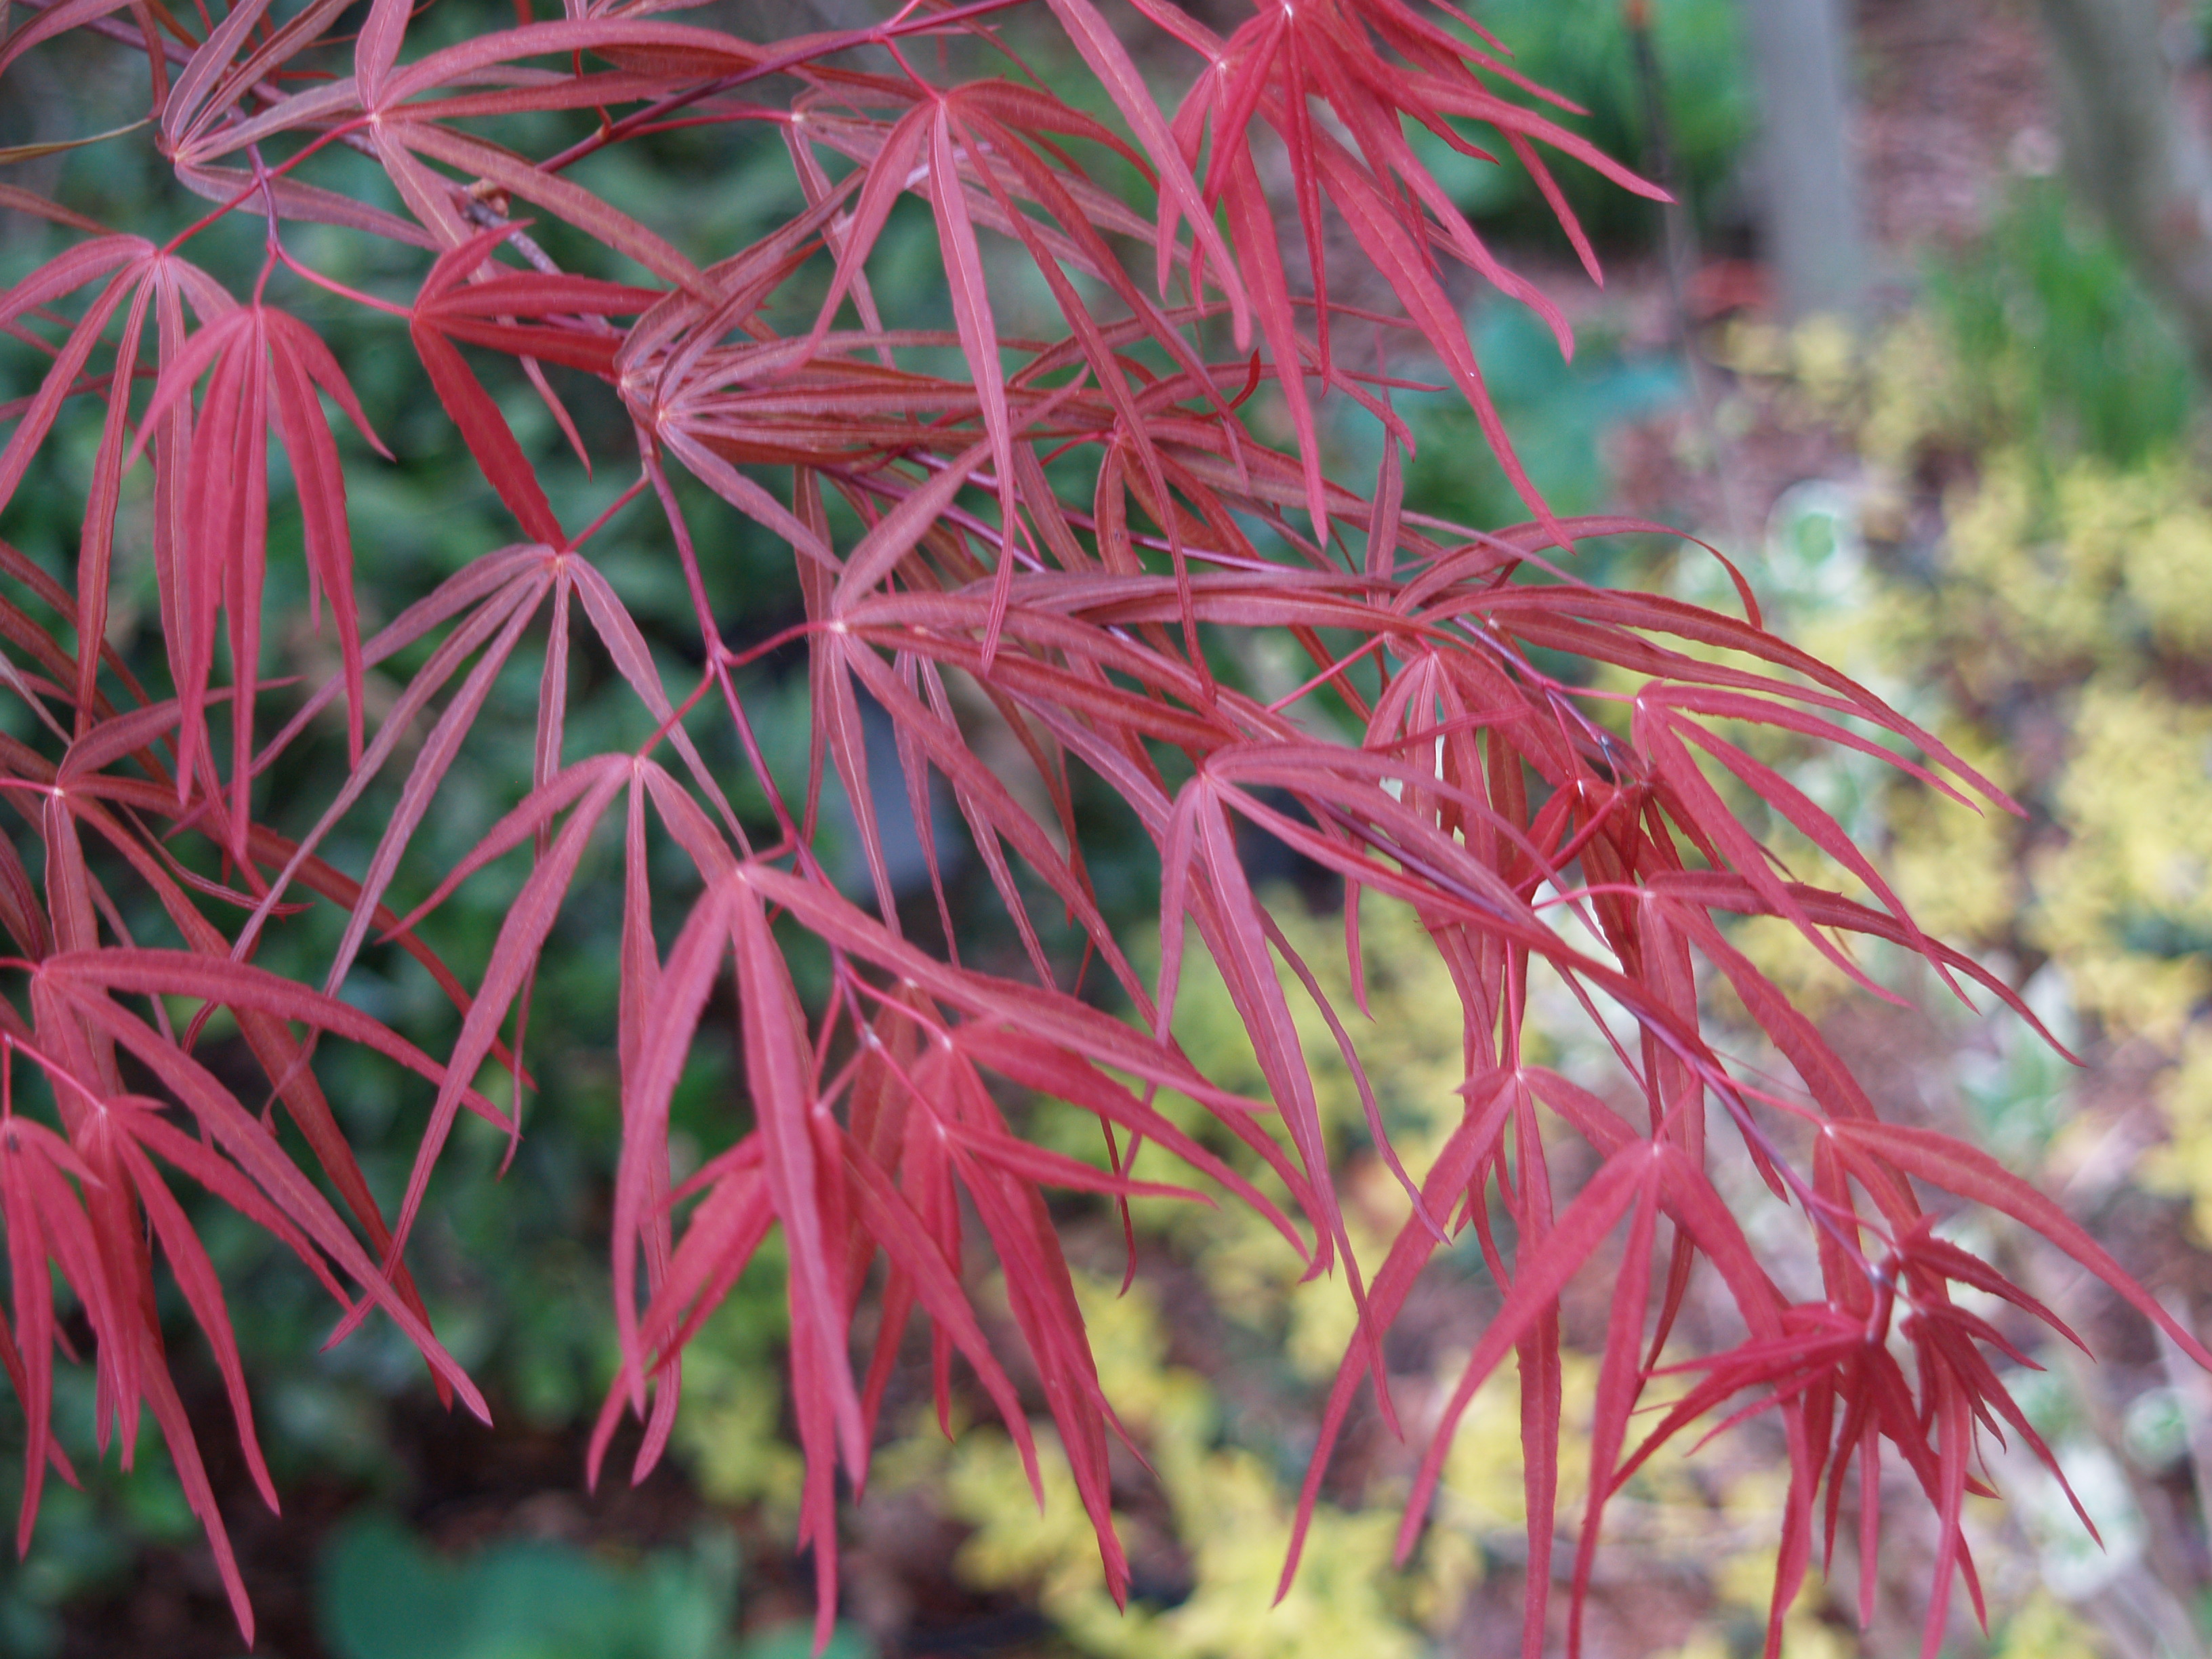 There are two Japanese maples in the garden with deeply dissected, threadli...